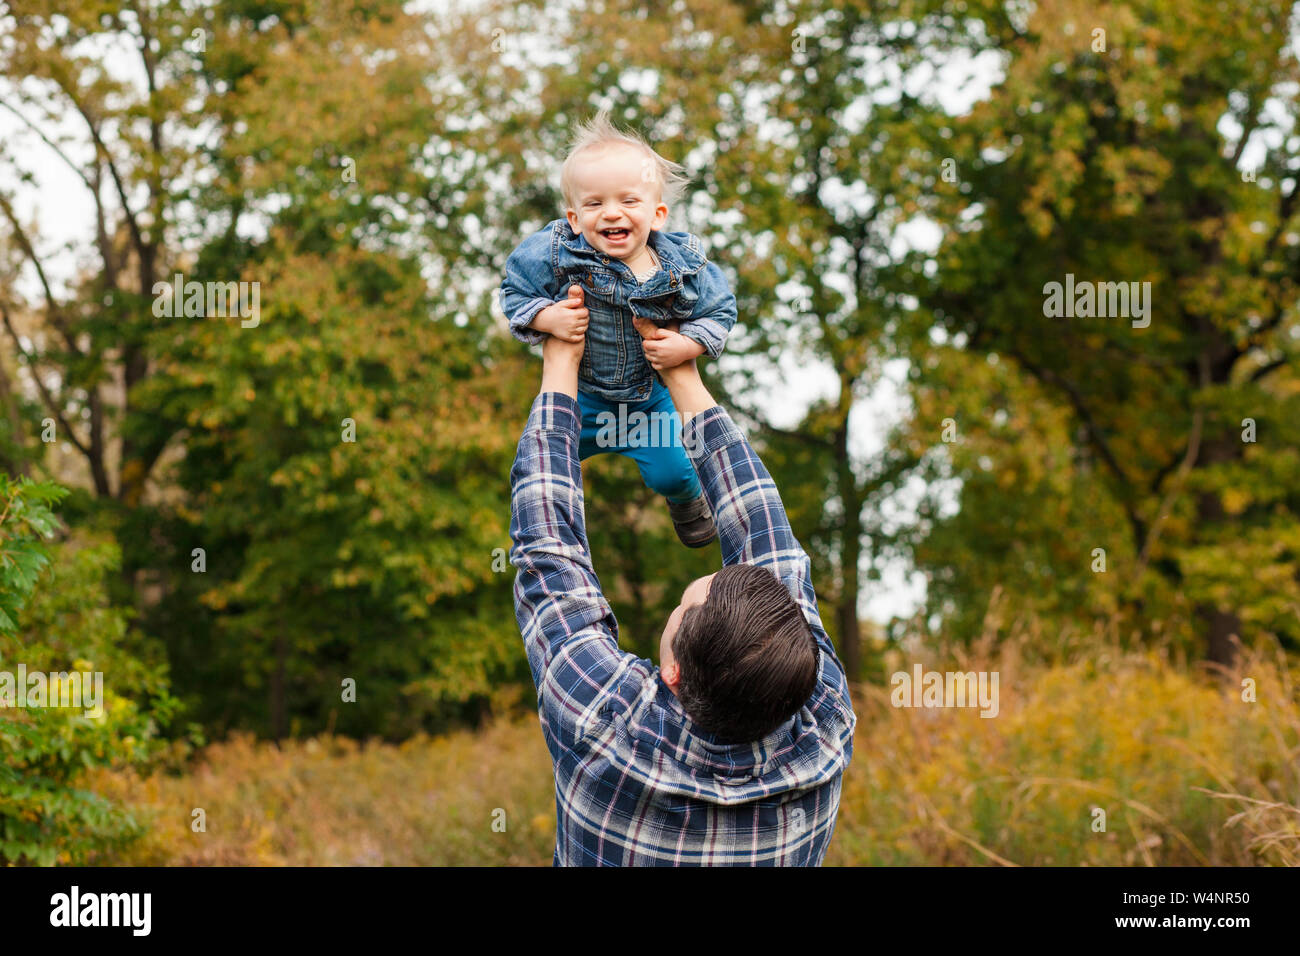 A father lifts his laughing baby boy  high up into the air outside Stock Photo